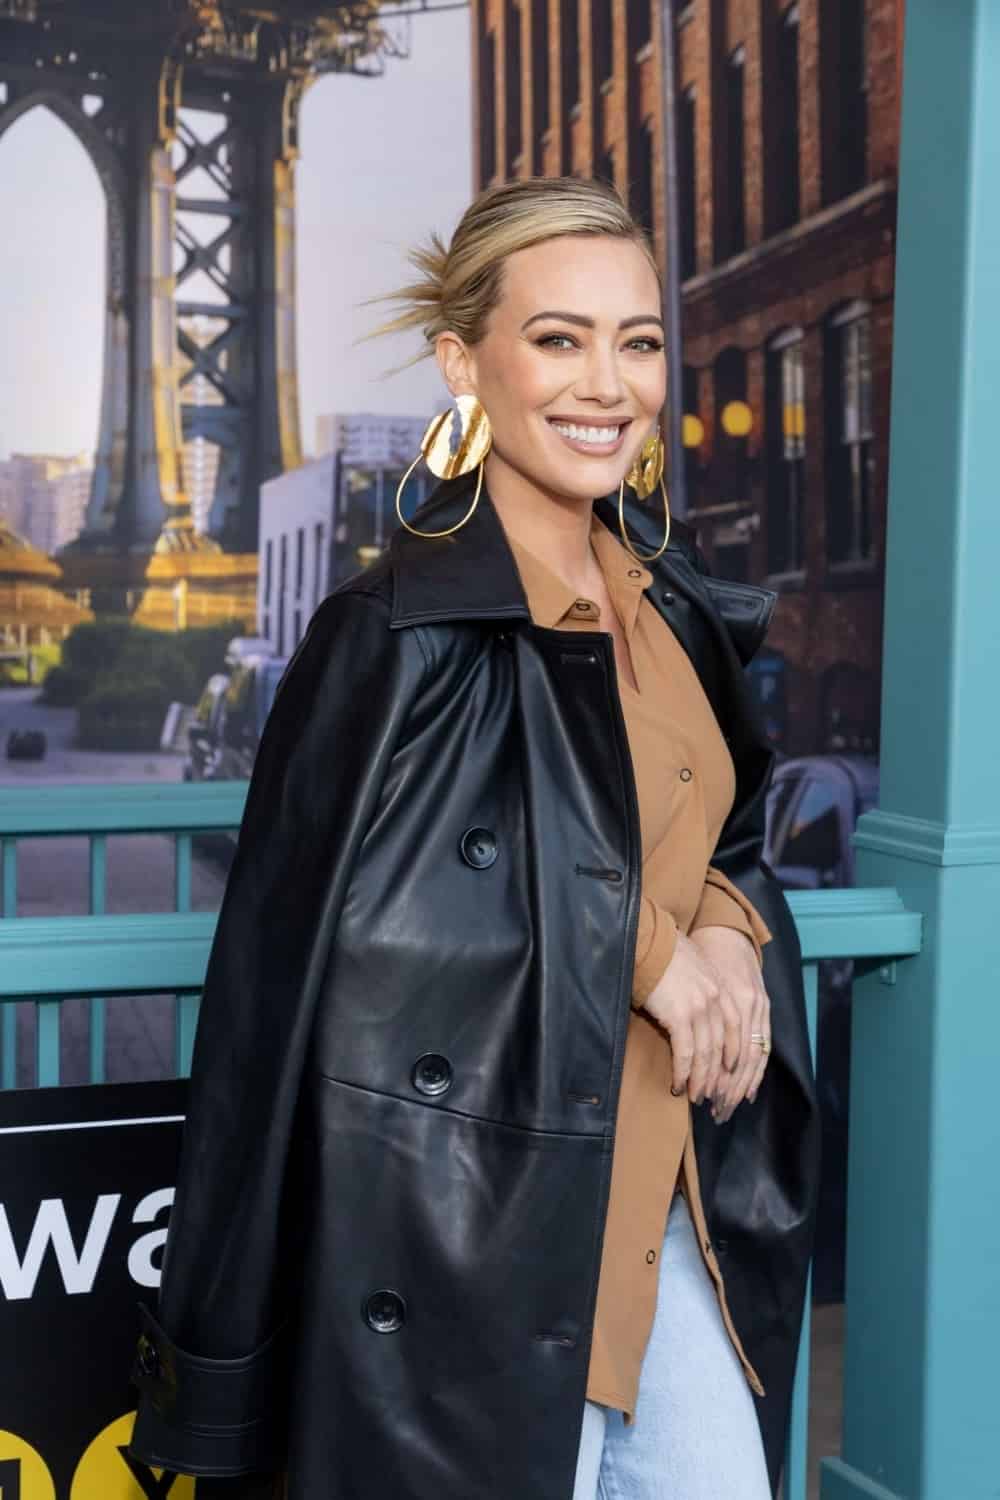 Hilary Duff Looked Mesmerizing at the “How I Met Your Father” Fans Event